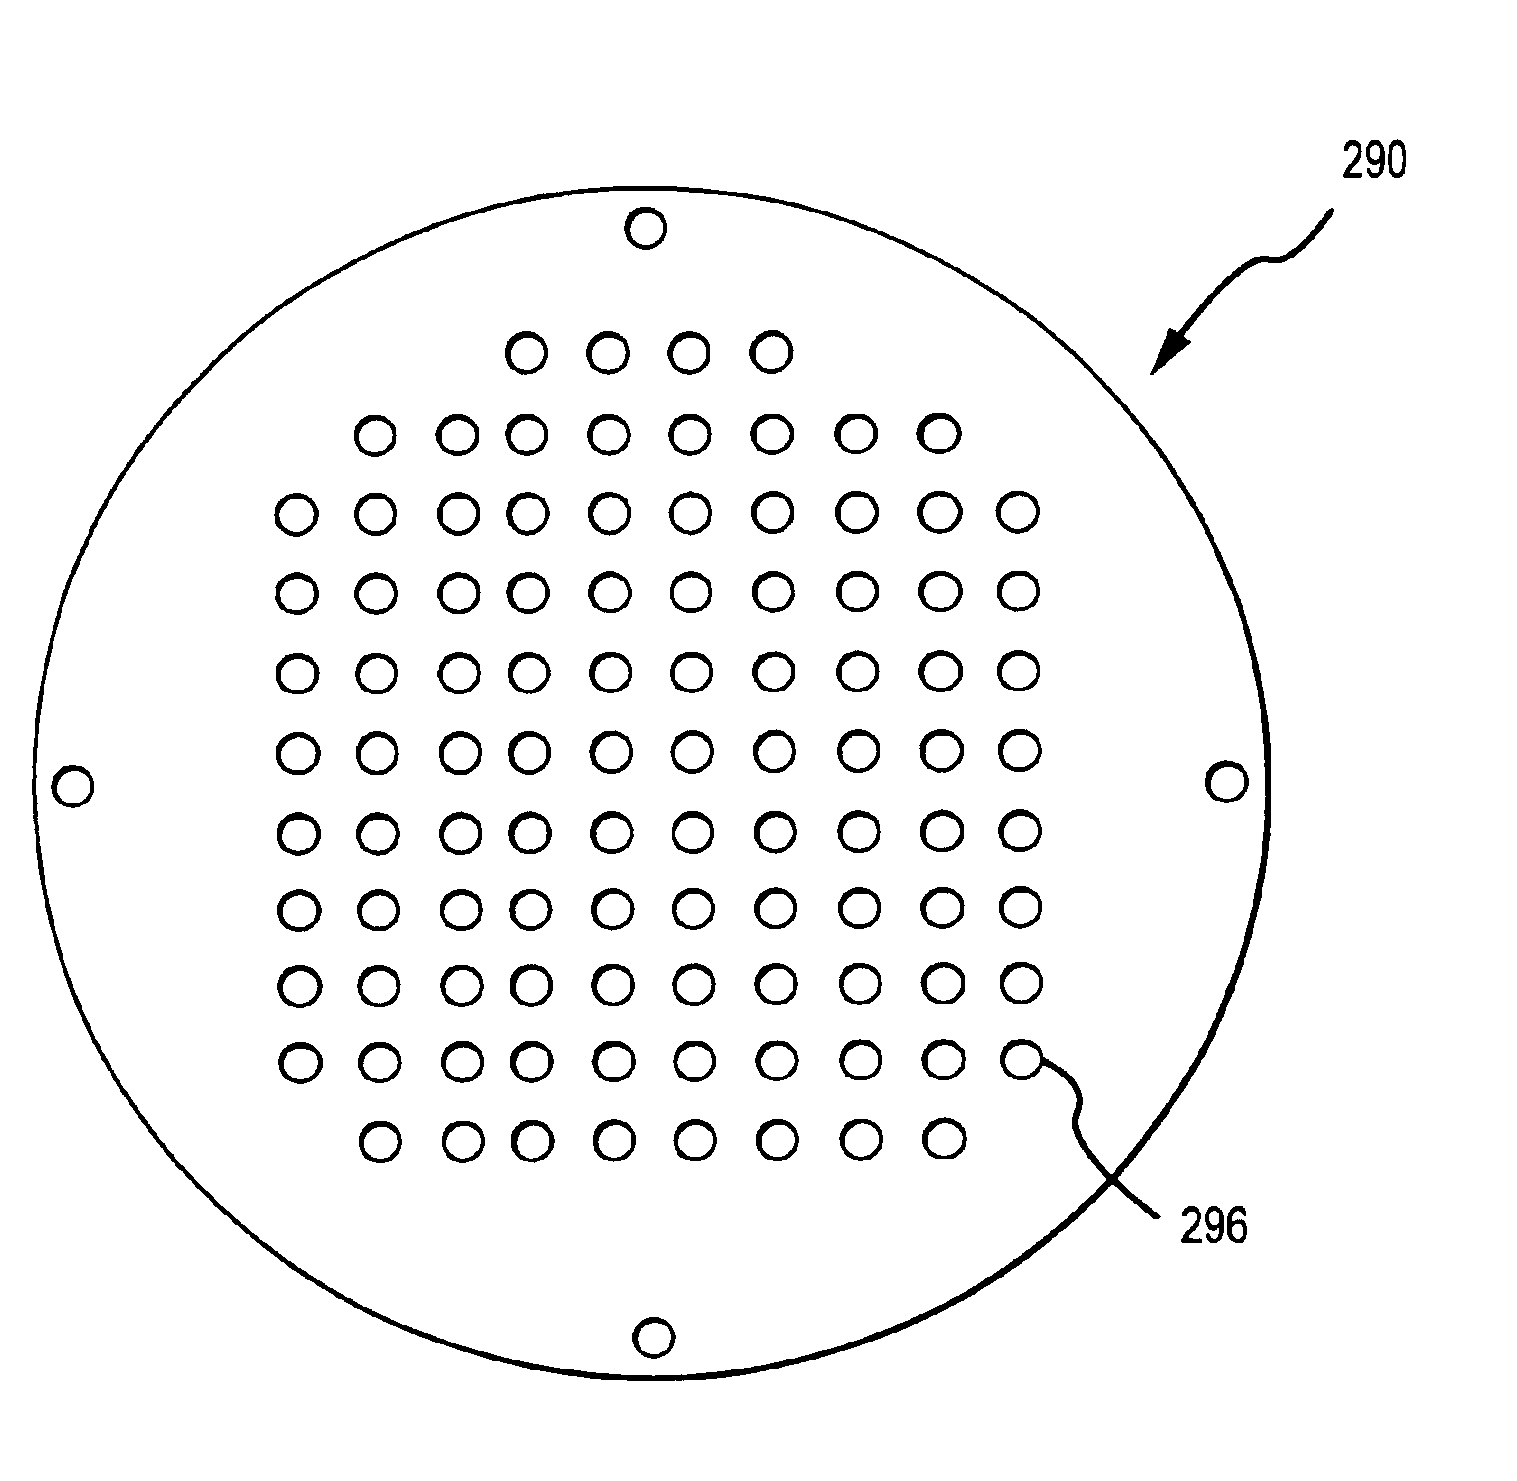 Cathodoluminescent phosphor powders, methods for making phosphor powders and devices incorporating same